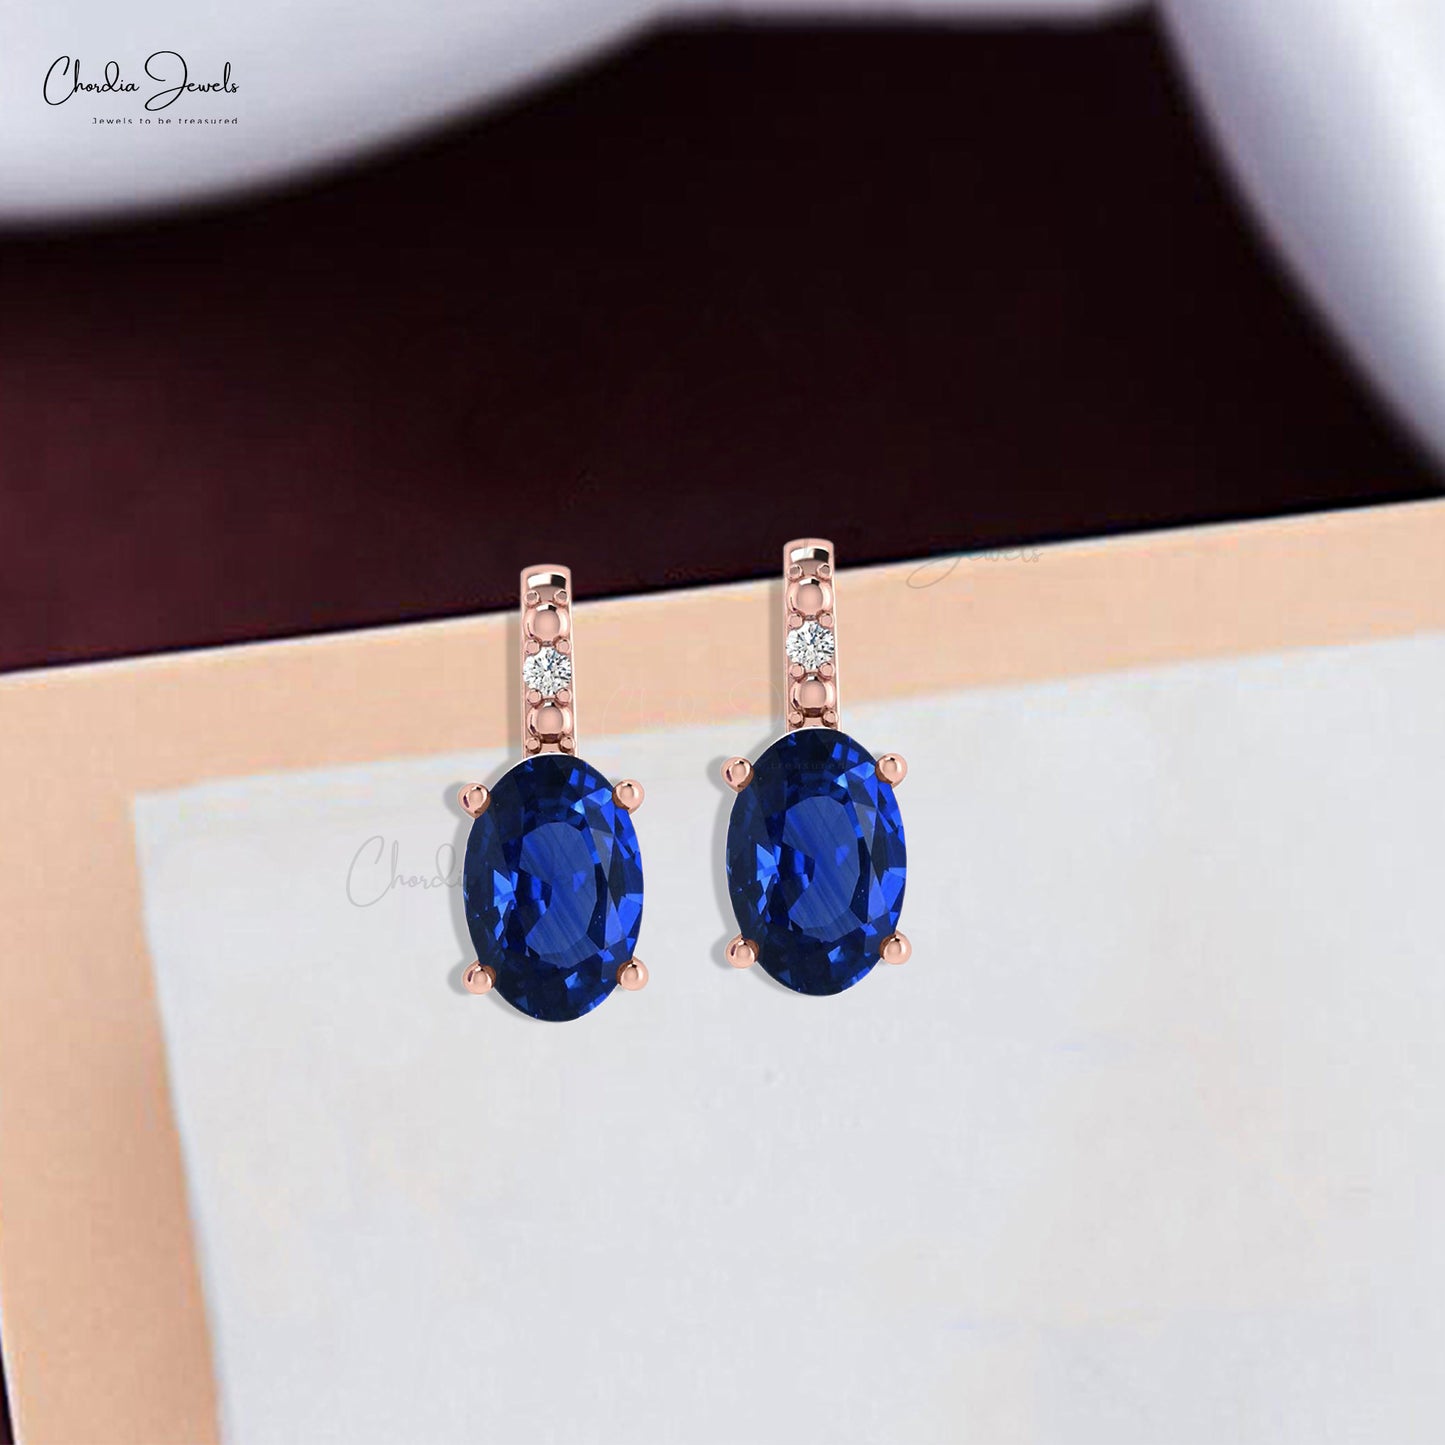 Iconic Blue Sapphire Prong Set Earrings 1.16Ct Oval Cut Genuine Gemstone Studs 14k Real Gold Diamond Art Deco Jewelry For Anniversary Gift